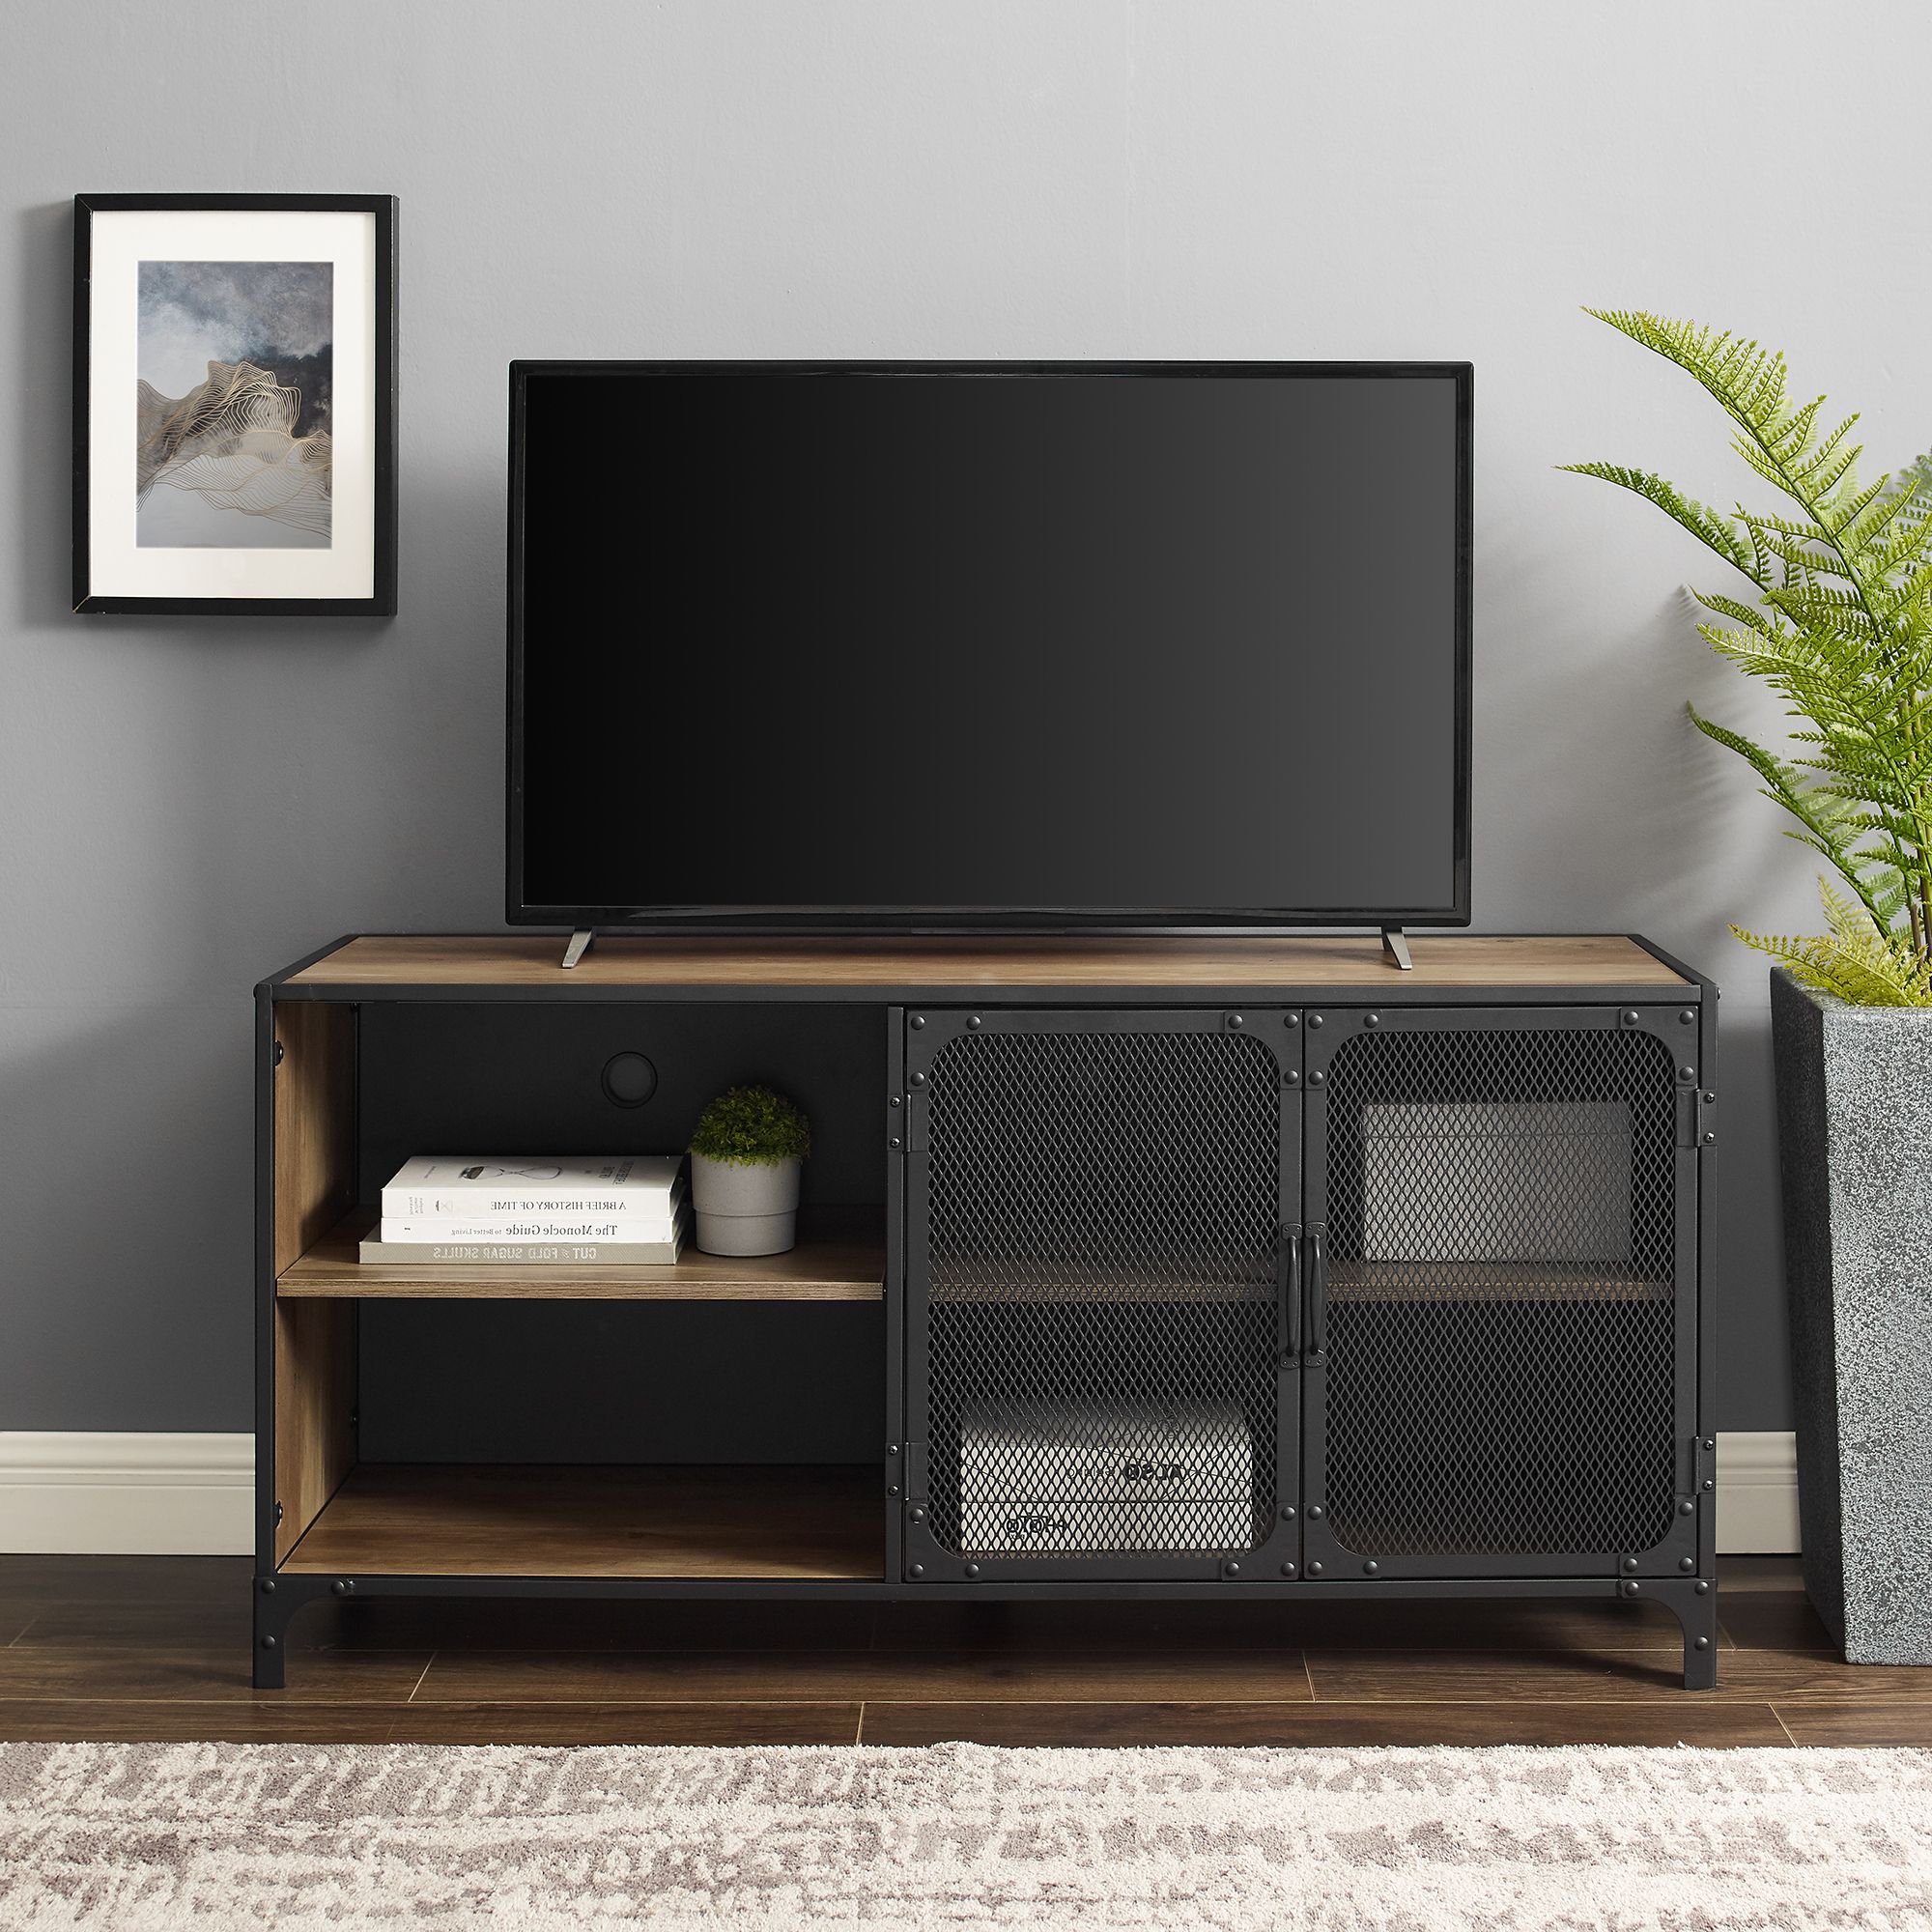 Manor Park Industrial Tv Stand For Tvs Up To 58 Pertaining To Kamari Tv Stands For Tvs Up To 58" (Gallery 2 of 20)